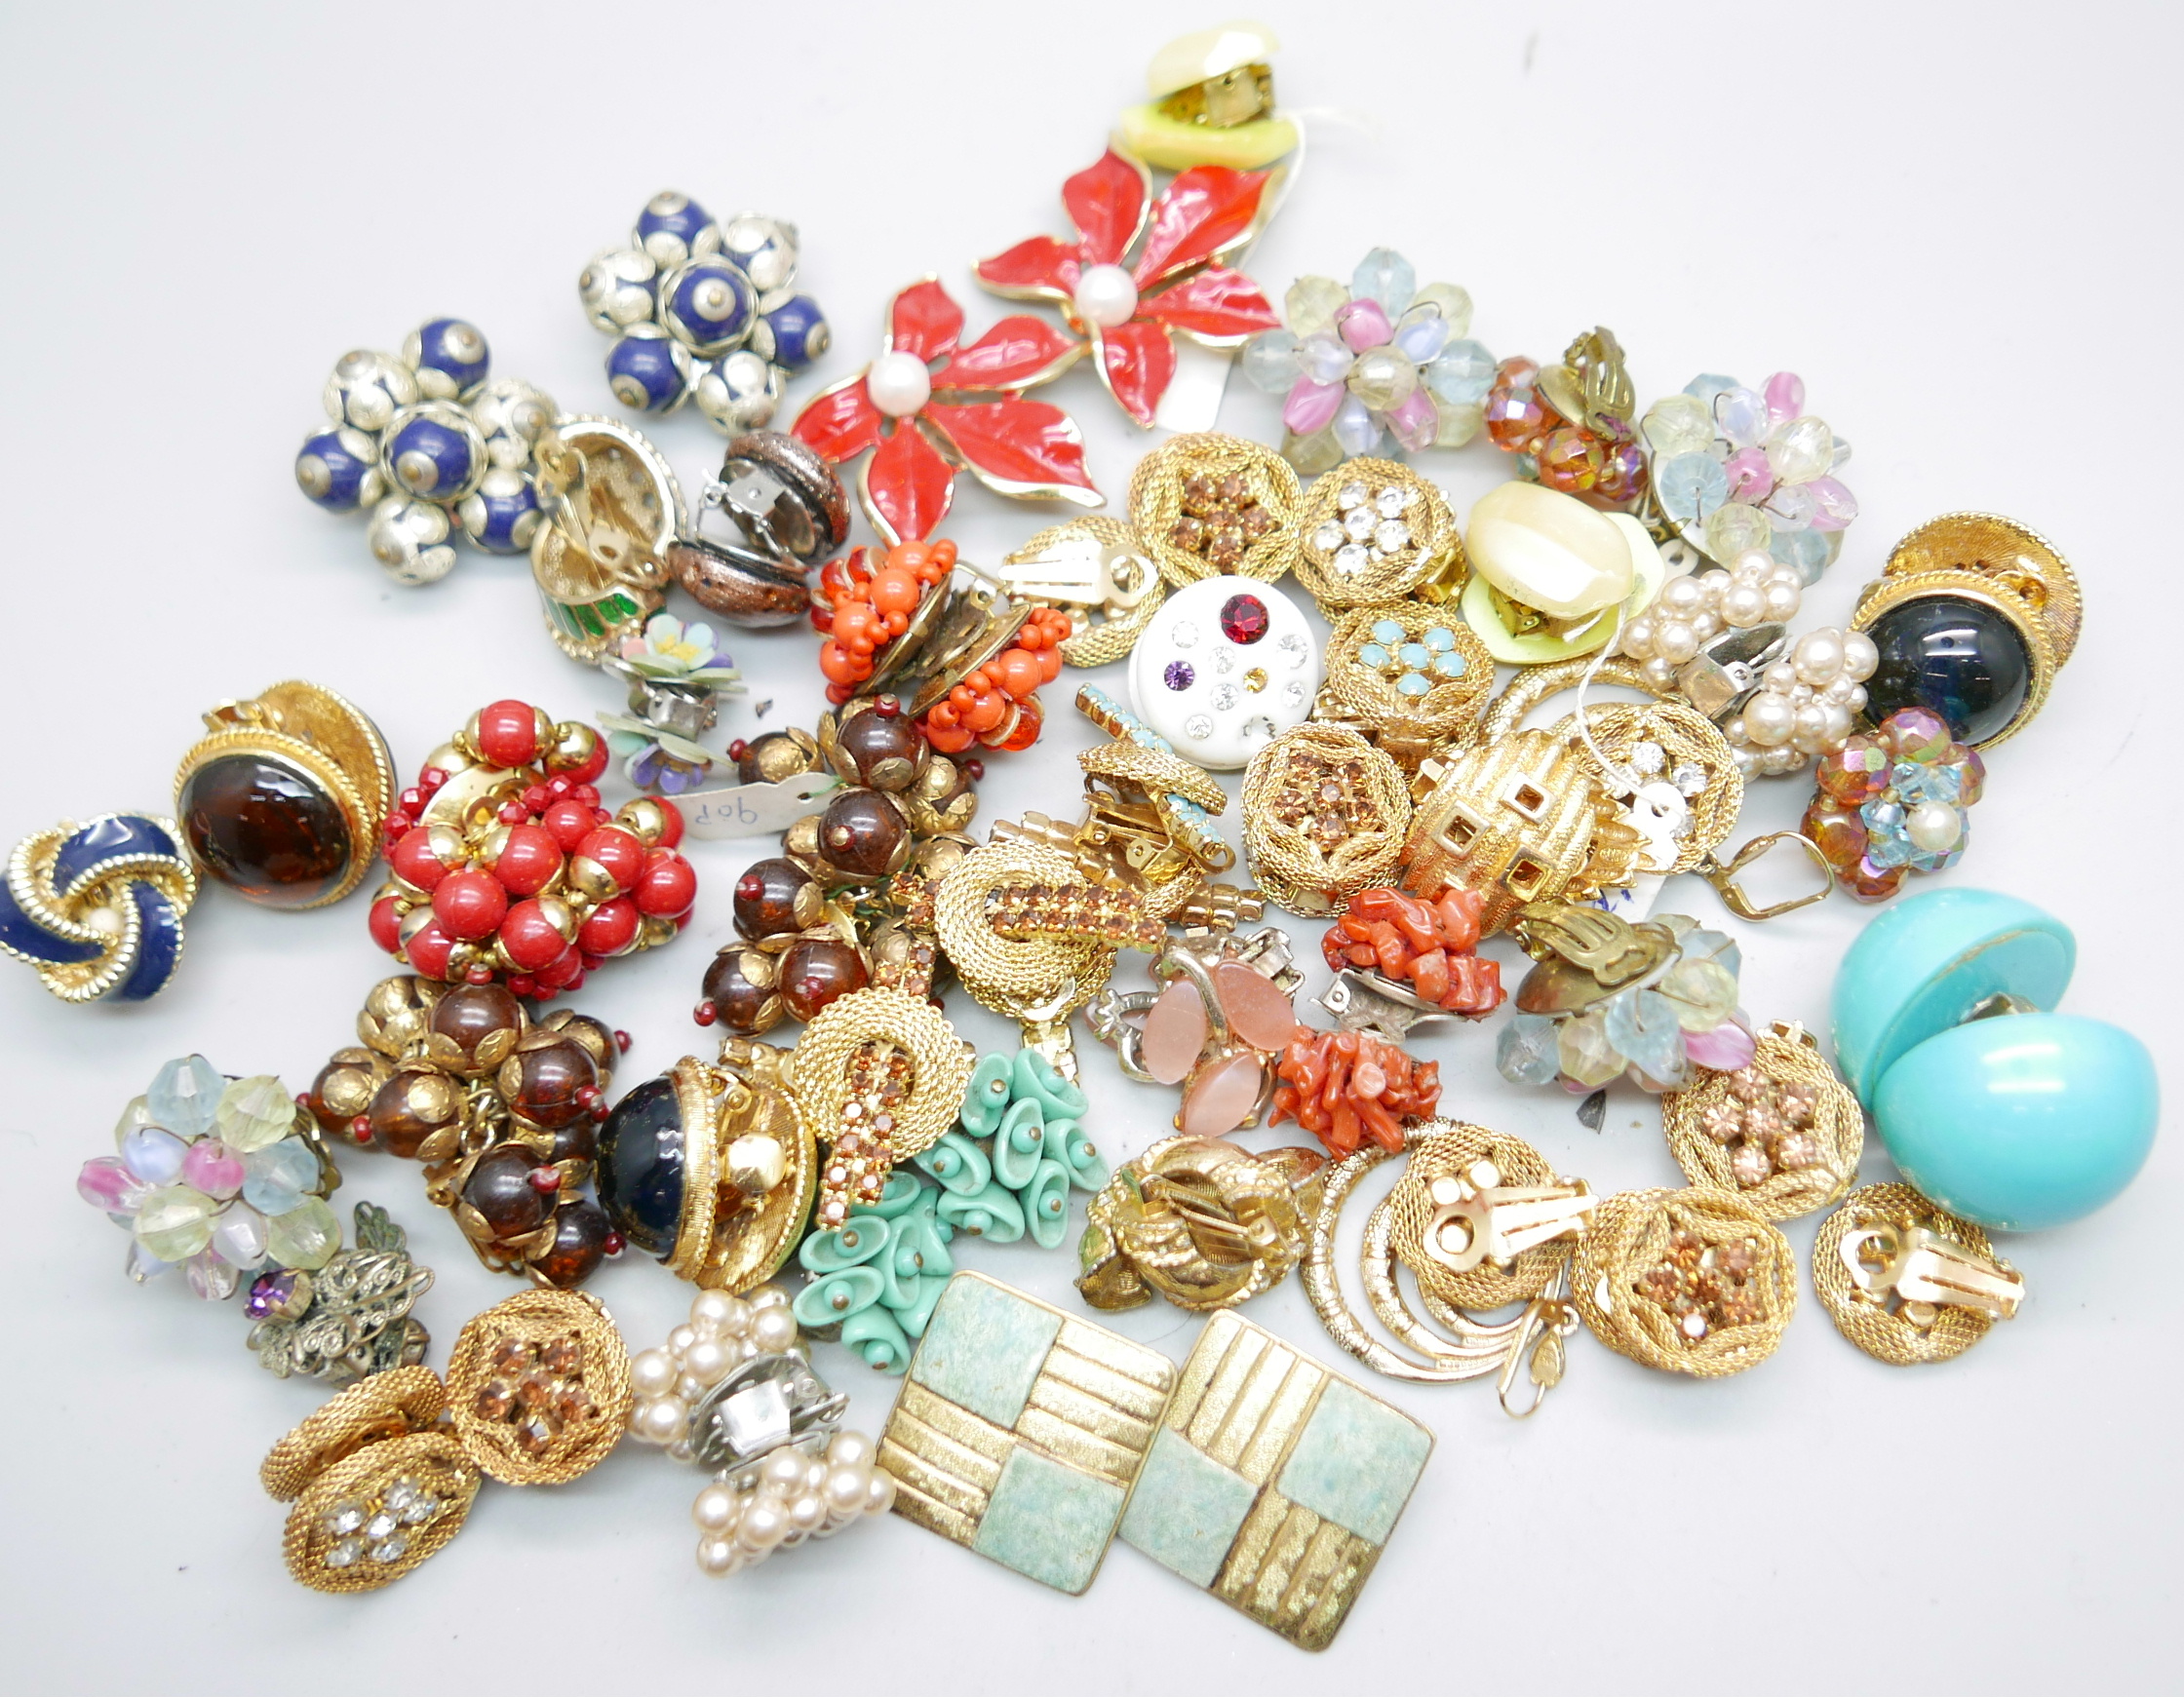 A collection of vintage clip-on earrings and a pair of coral earrings